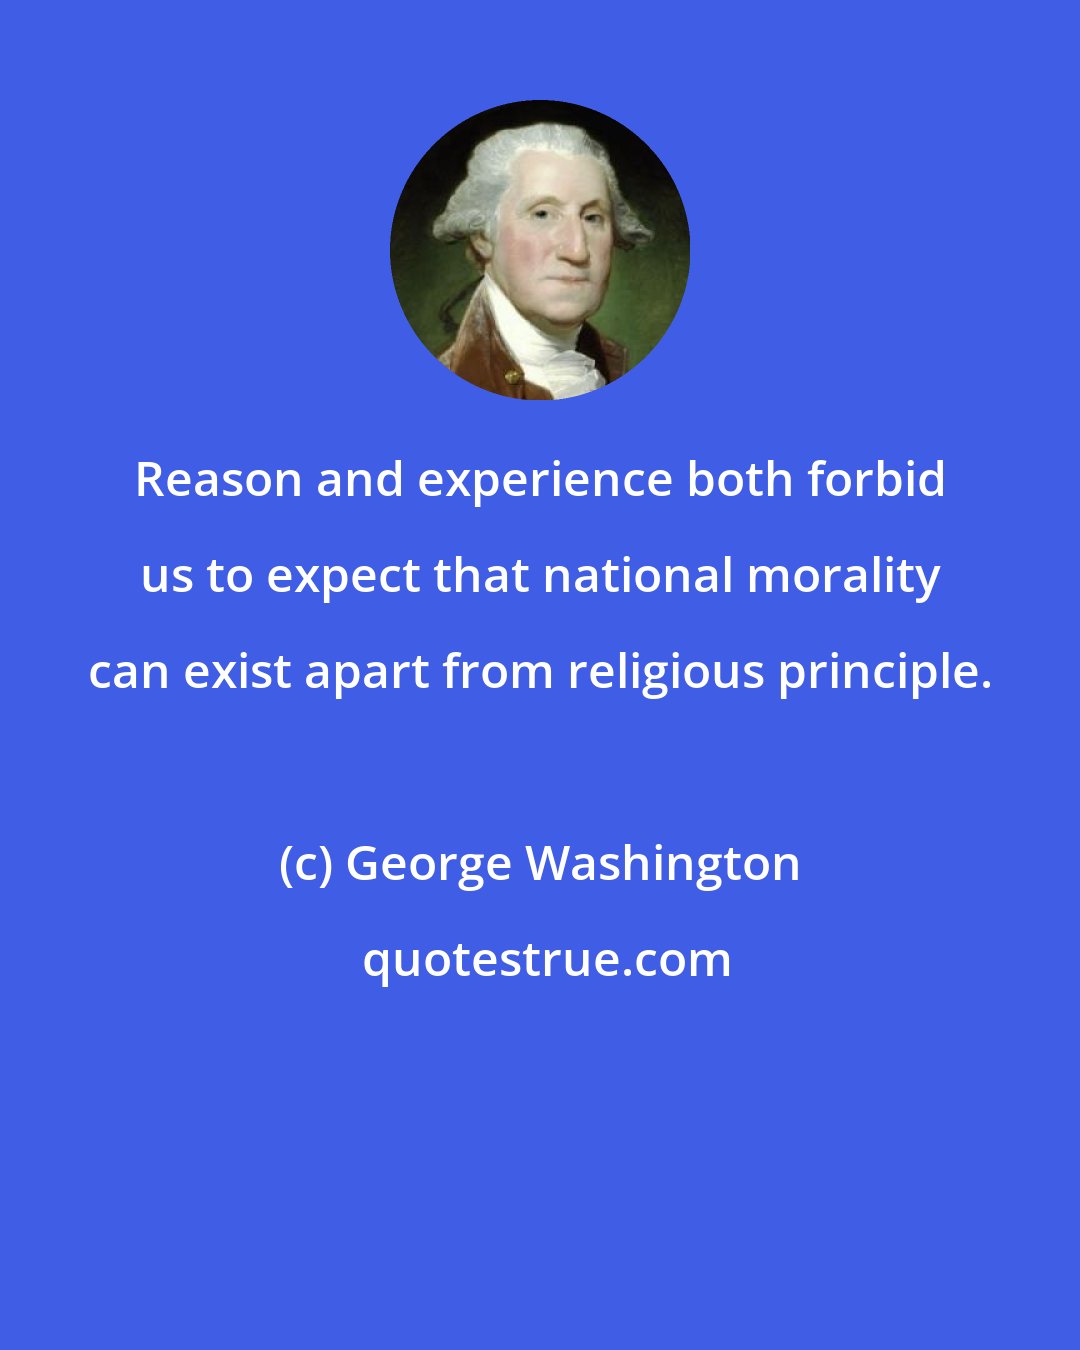 George Washington: Reason and experience both forbid us to expect that national morality can exist apart from religious principle.